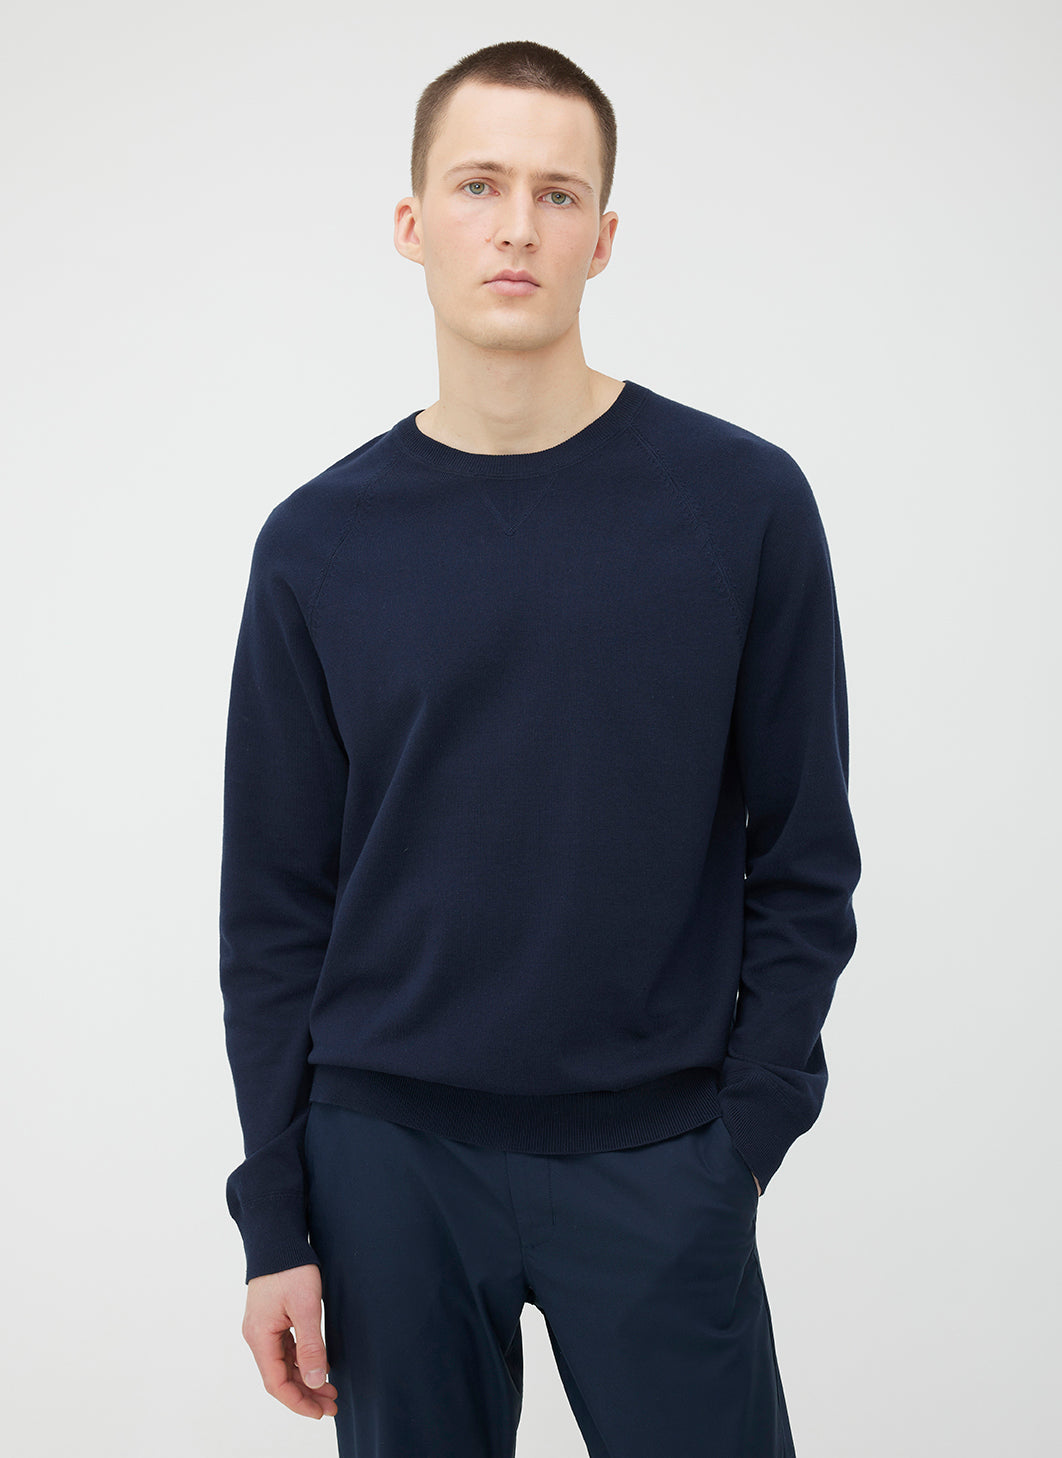 Navy blue gassed cotton long-sleeved T-shirt